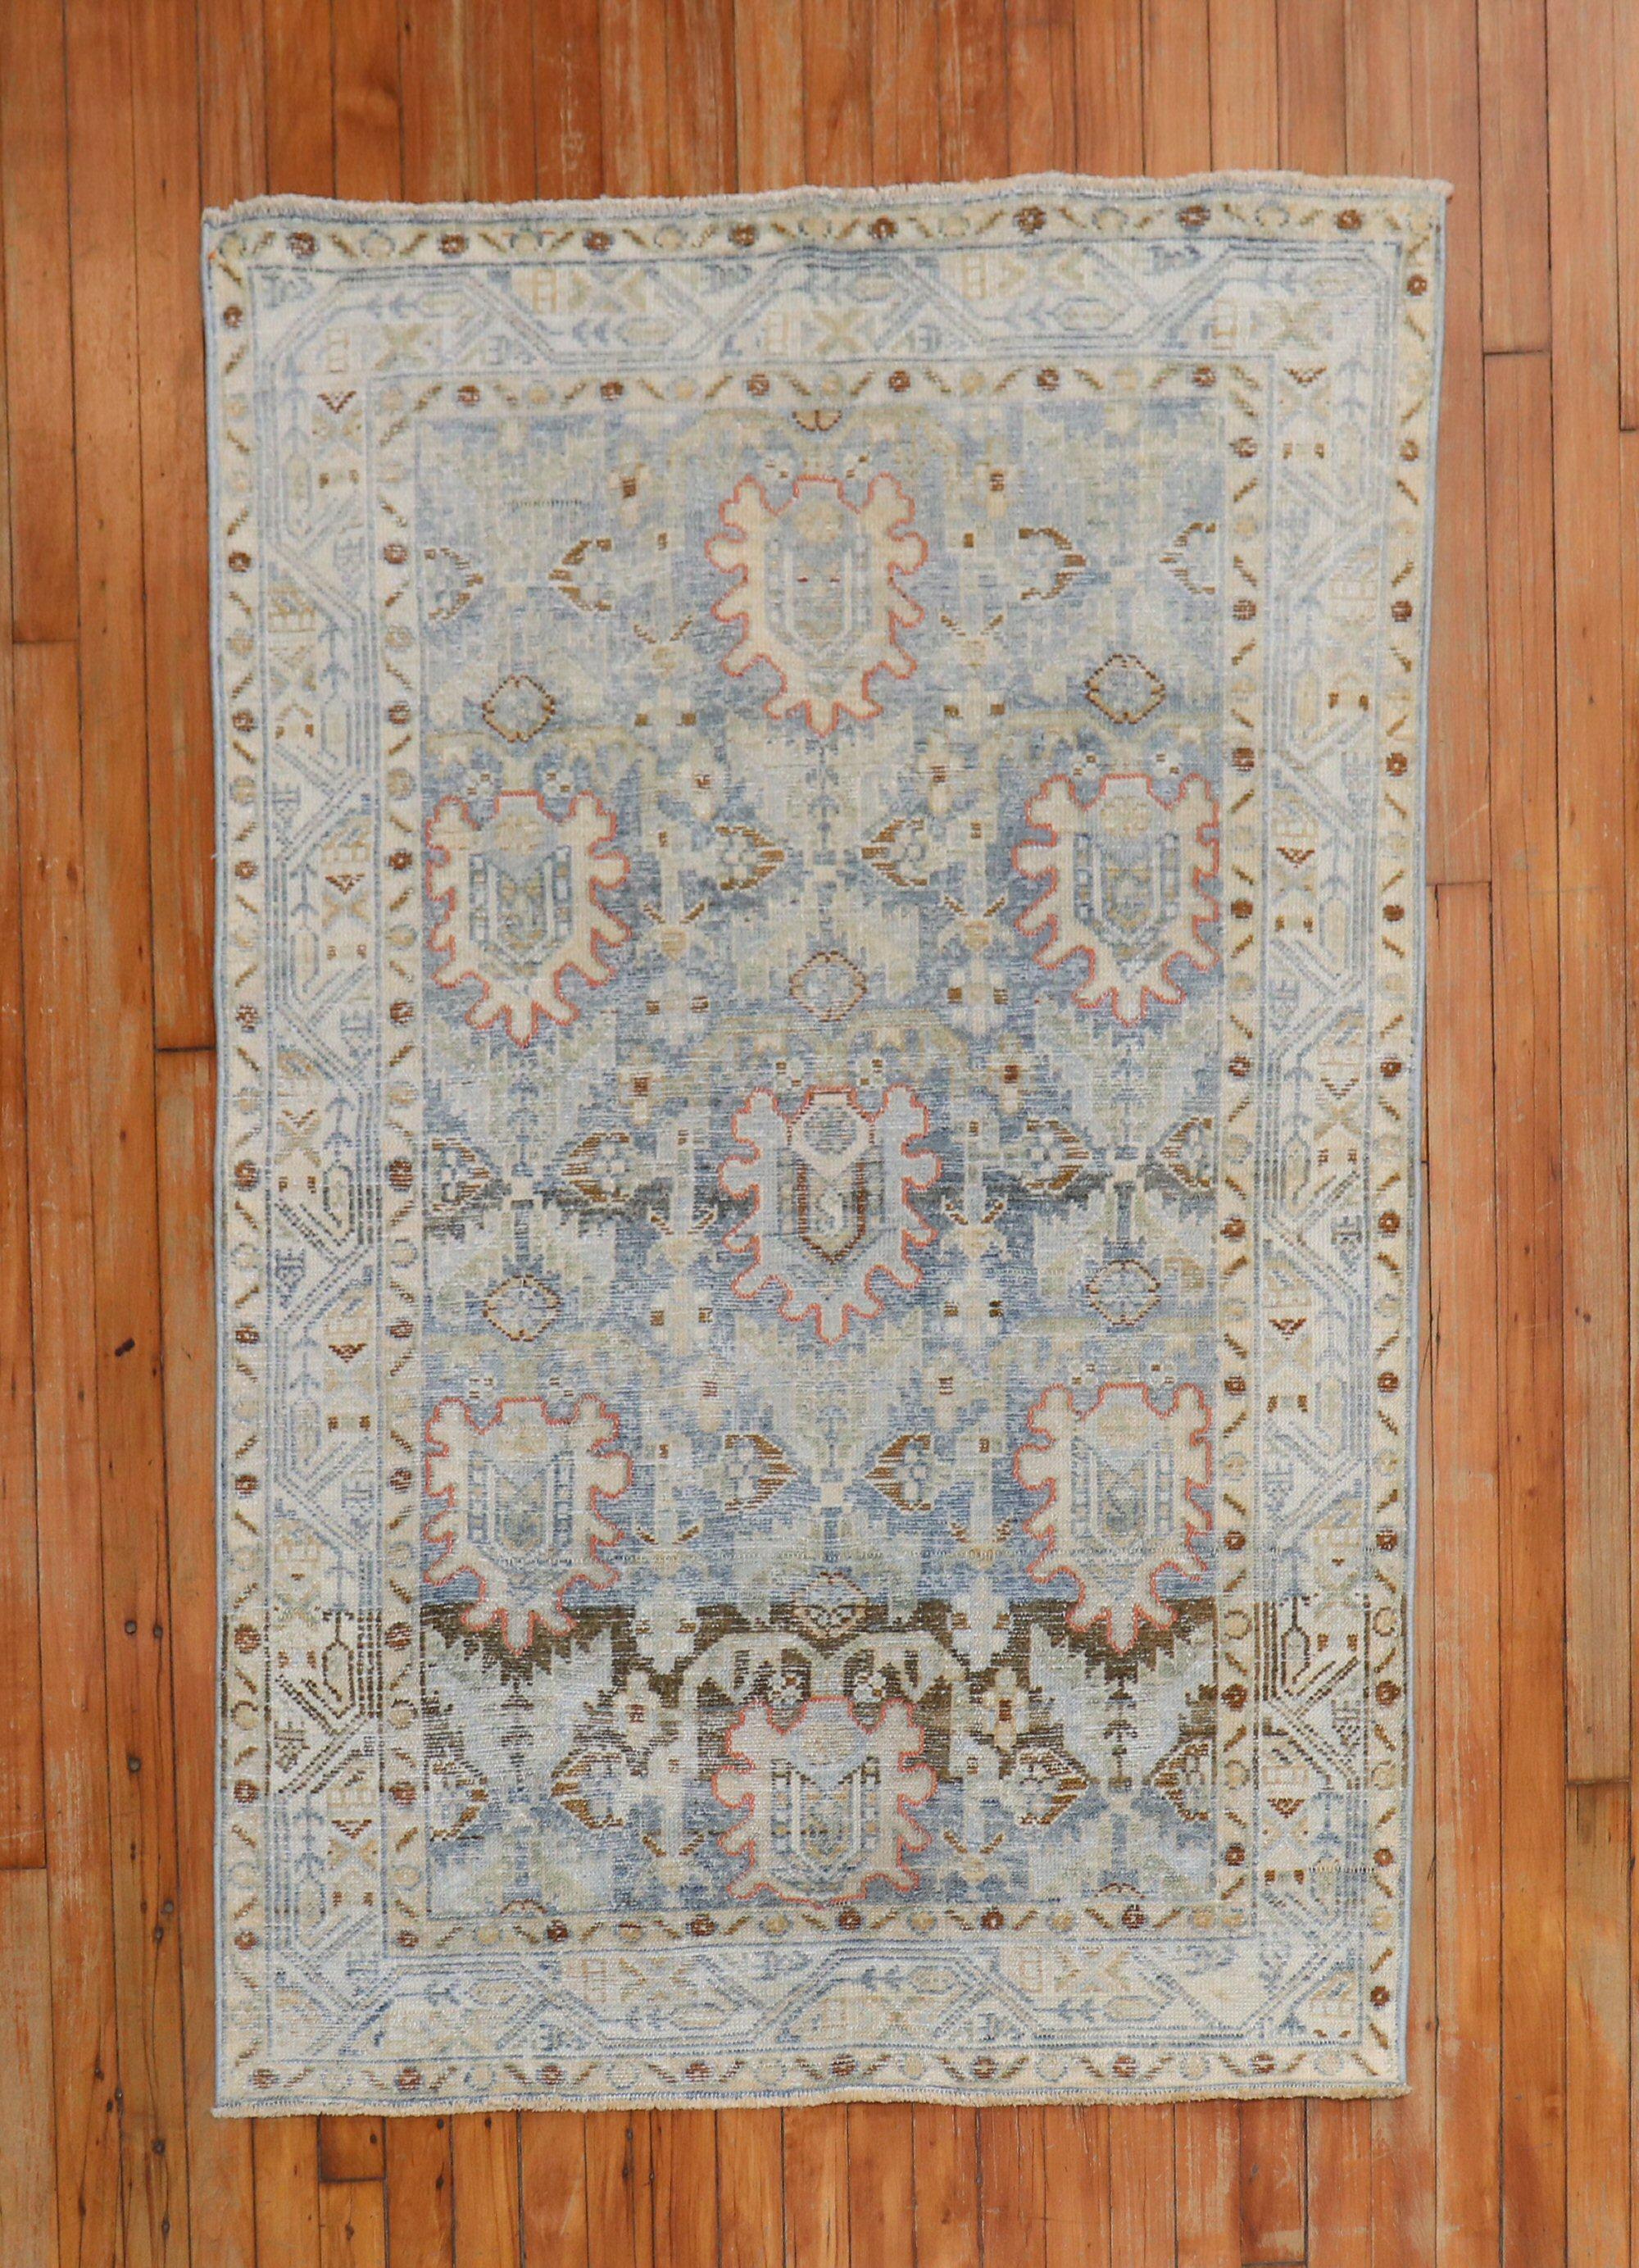 Persian Malayer Scatter Rug in earth tones from the 2nd quarter of the 20th century

size	3' 5